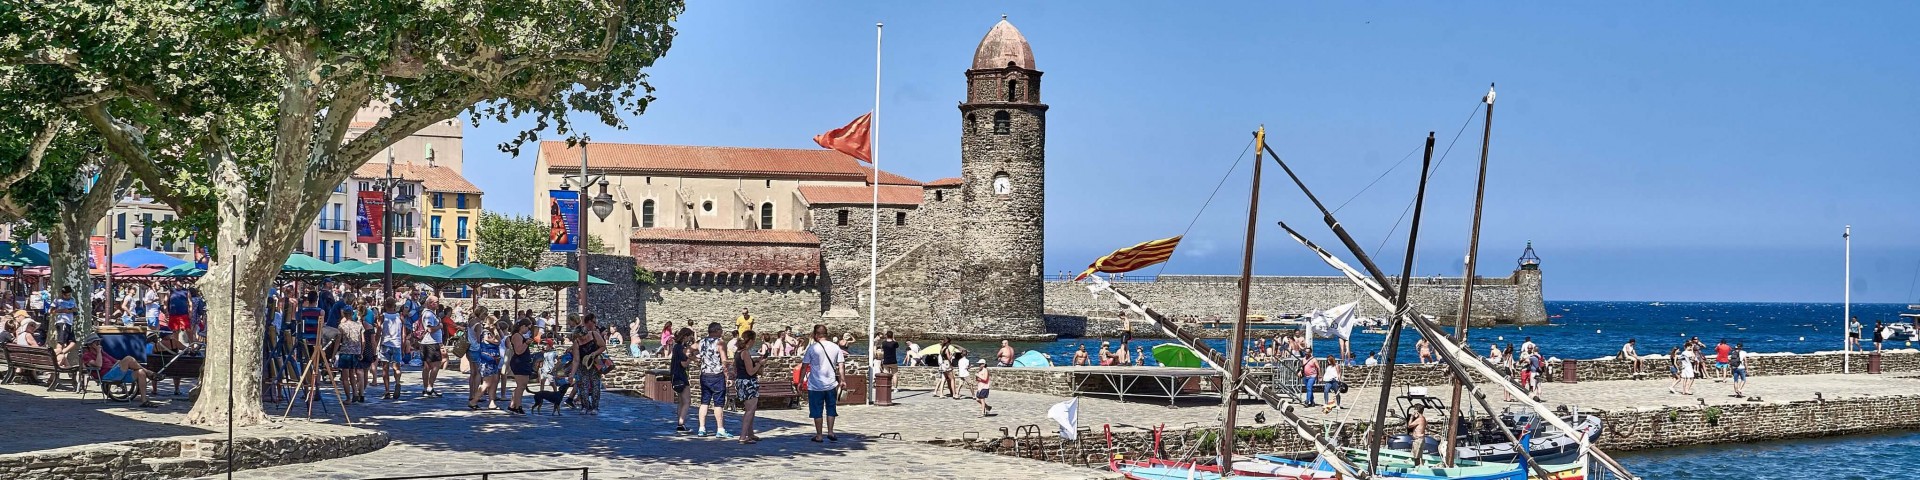 Notre-Dame-des-Anges and its bell tower, Collioure, France